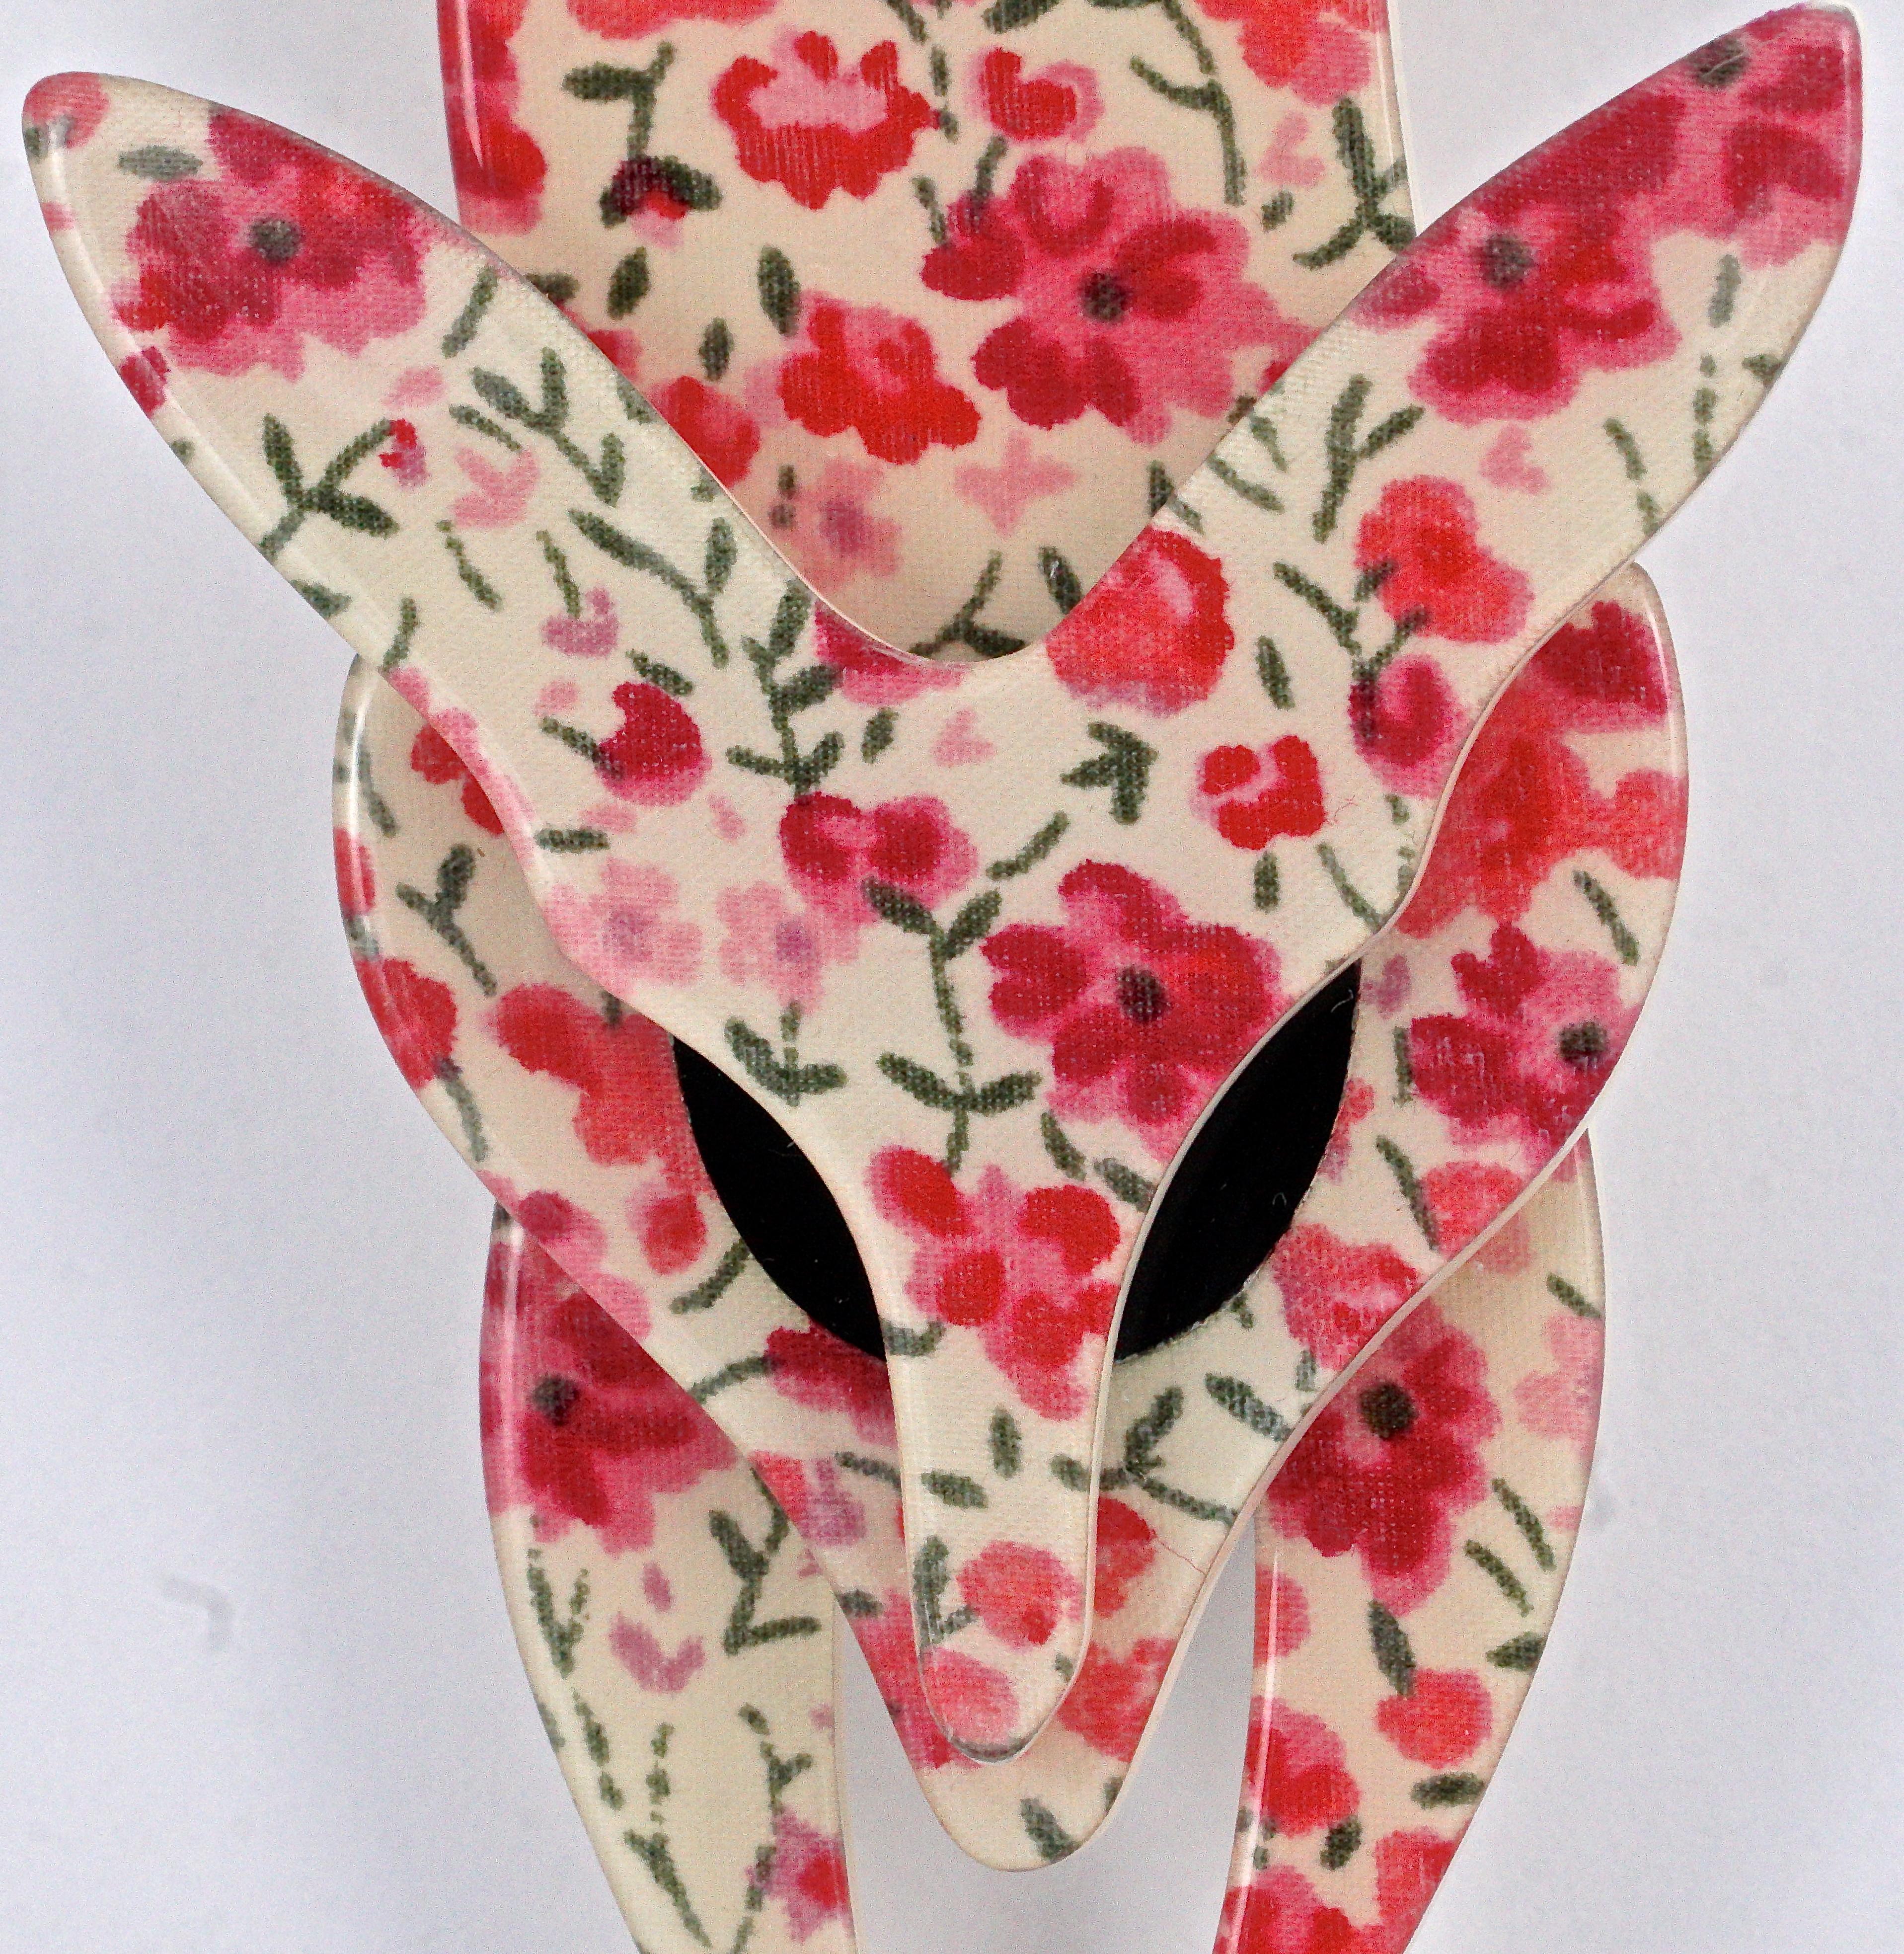 Lea Stein cream fox brooch in very good condition, featuring a red, pink and black Liberty flower print design. The brooch is made from layered plastic, and measures length 9.5cm / 3.74 inches, by maximum width 5.9cm / 2.32 inches.

This is a